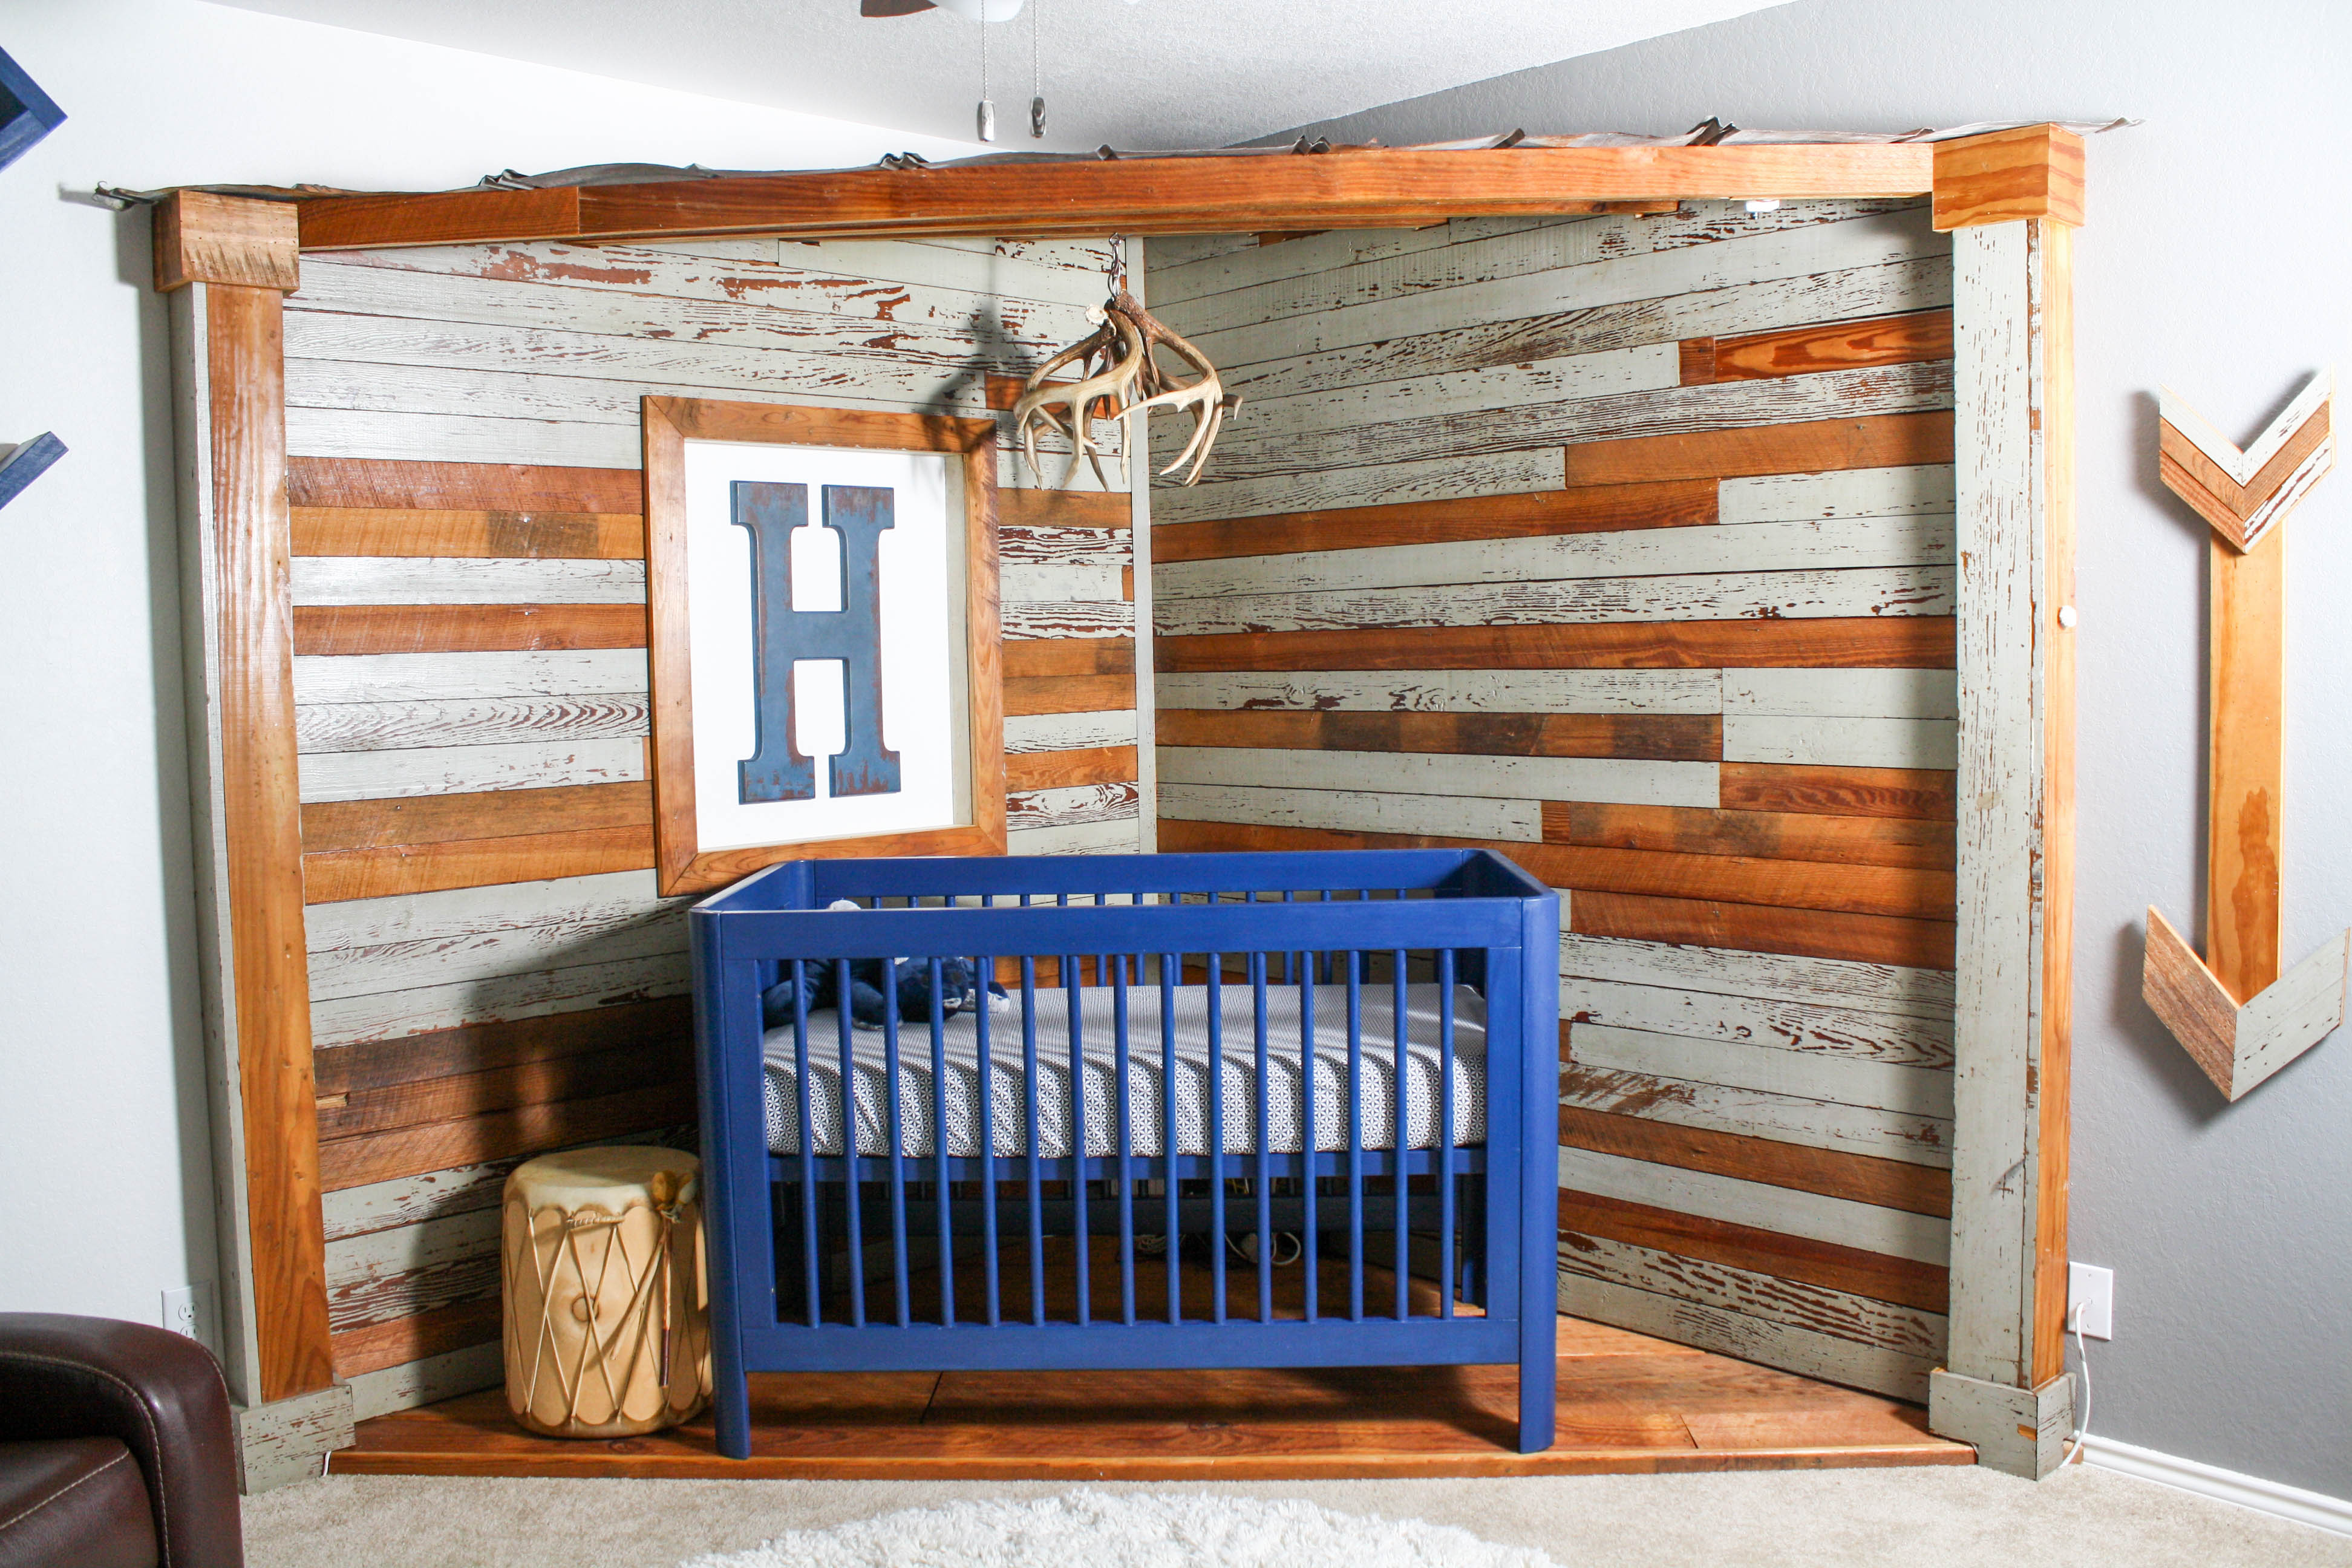 Start Catching Dreams with this Whimsical DIY - Project Nursery